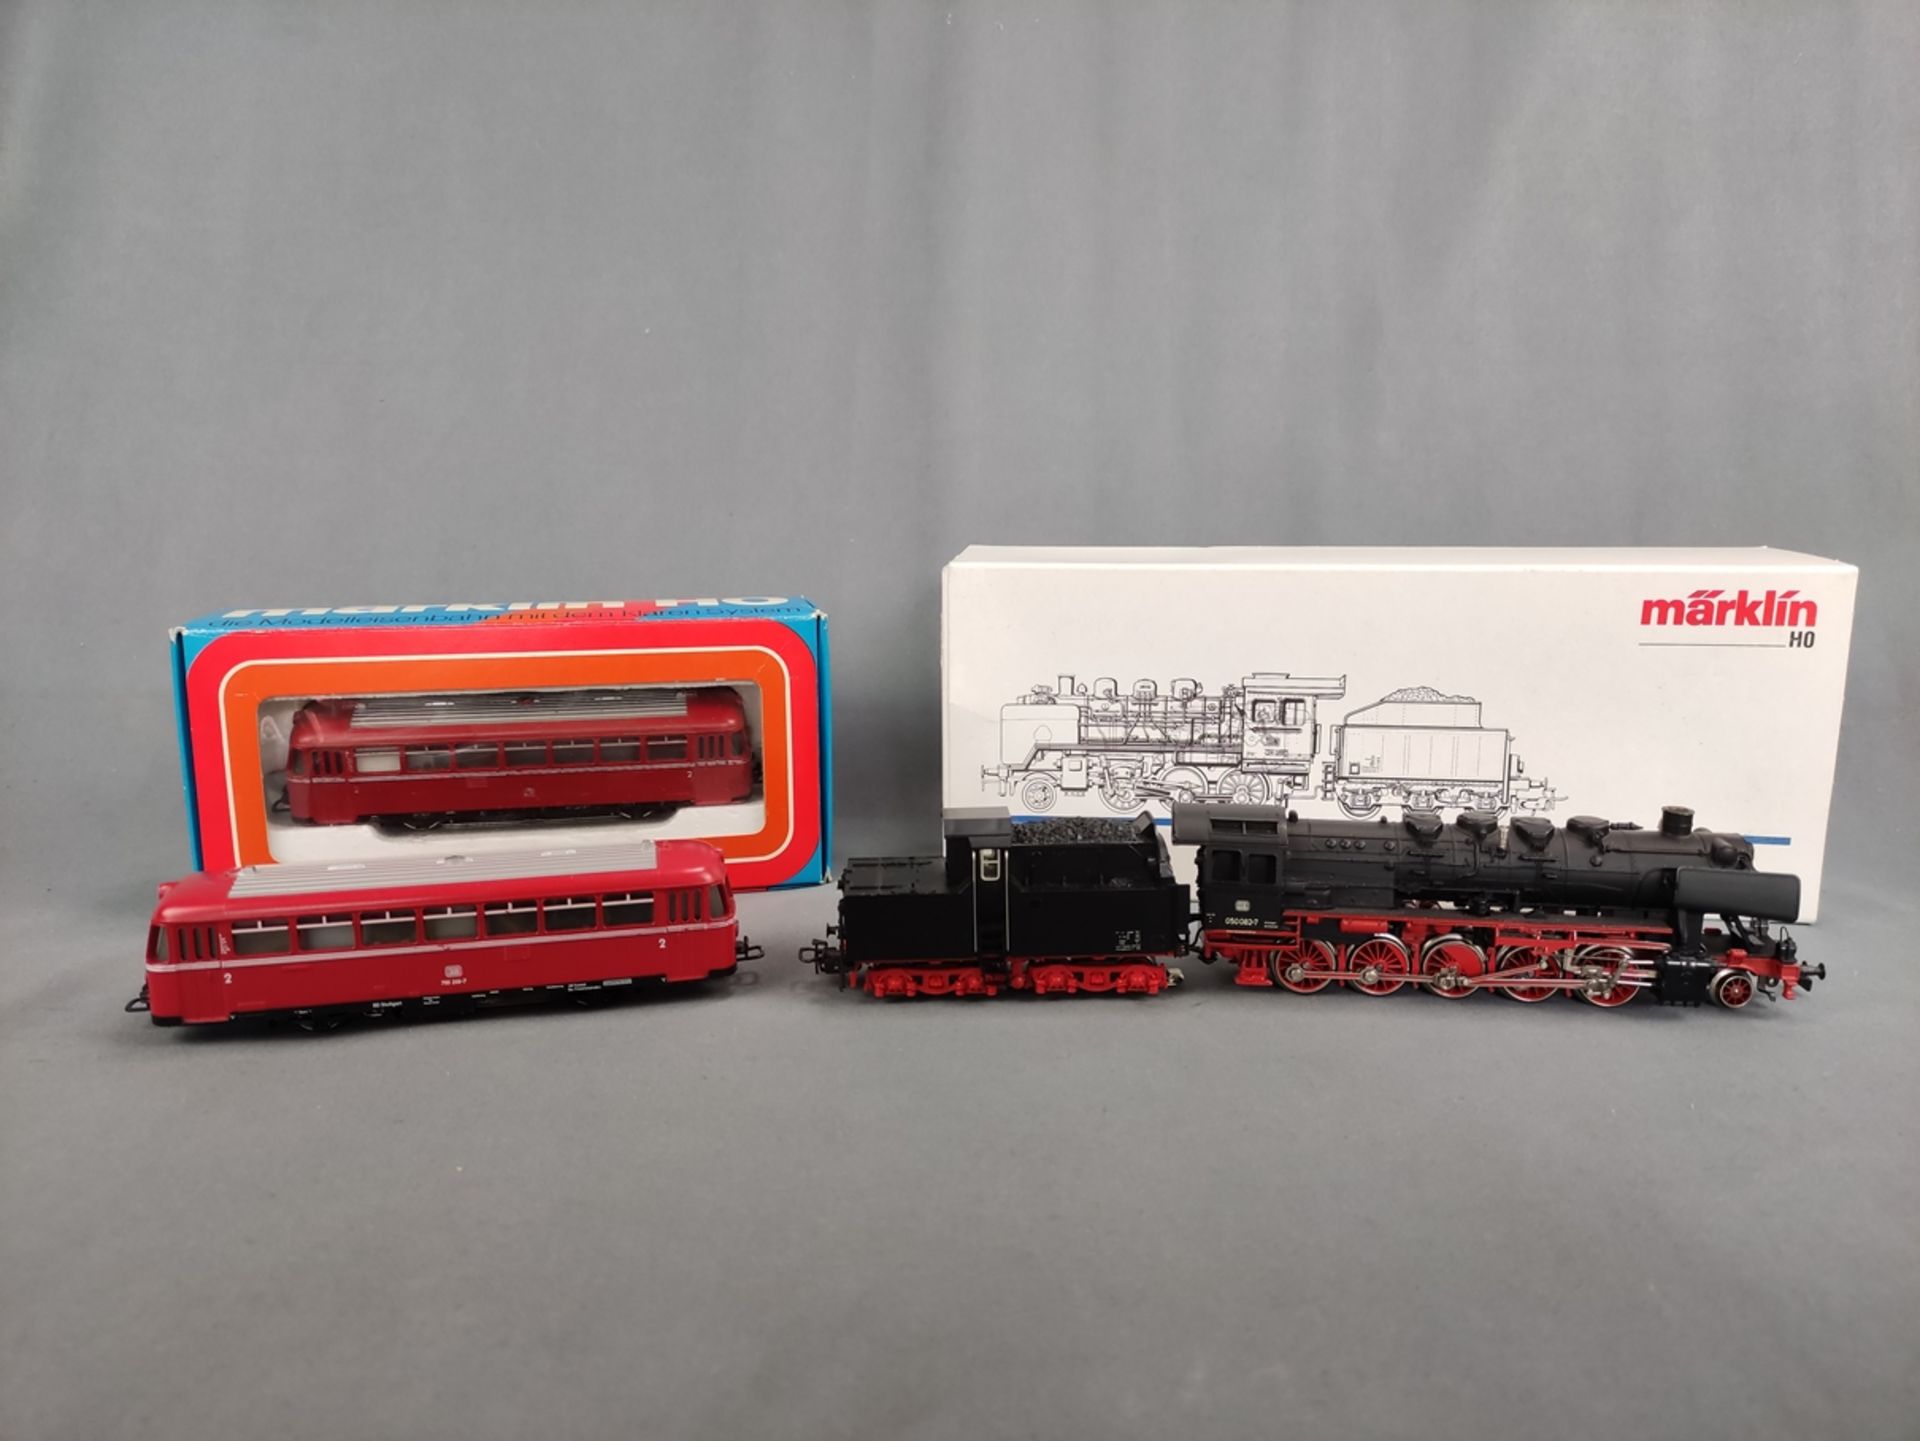 Märklin Lot, two locos and two railbuses, loco 3003 with tender in box, loco DB 050 082-7 with tend